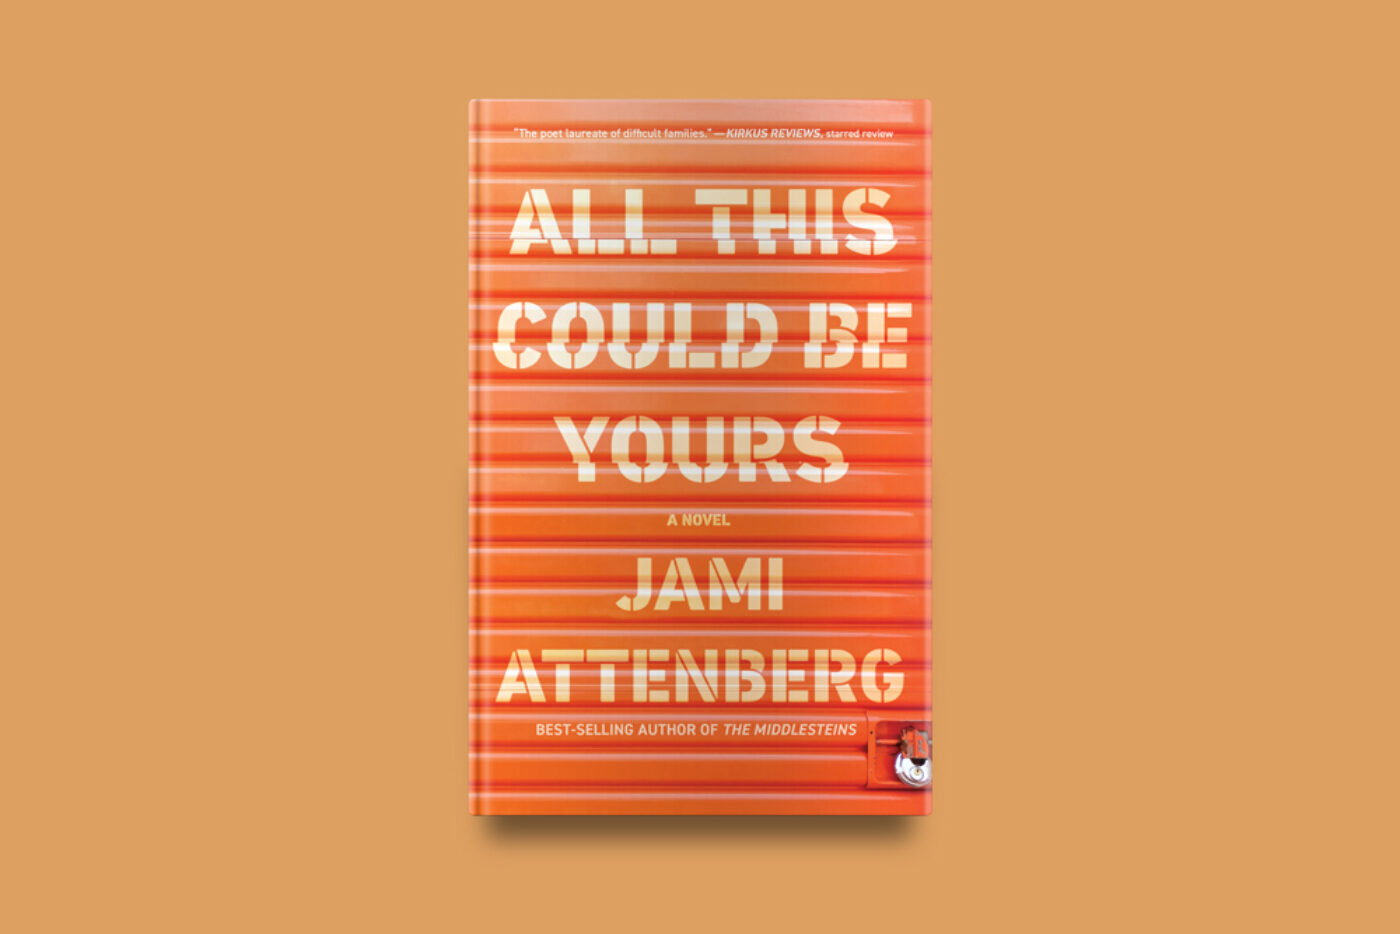 all this could be yours by jami attenberg